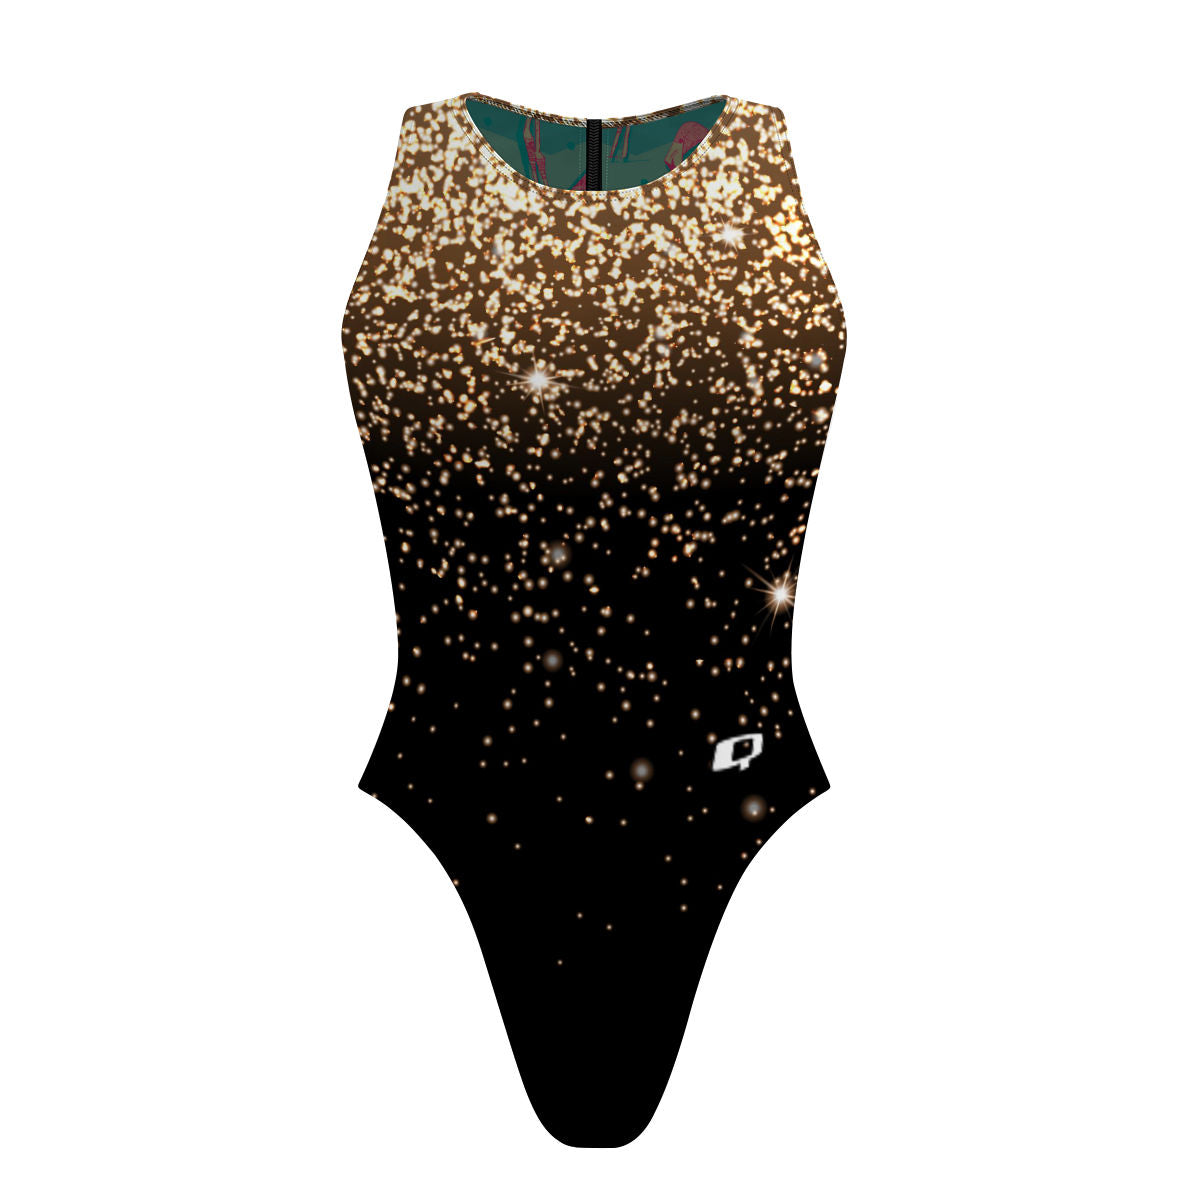 All that Glitters/Flock of Flamingos - Women Waterpolo Reversible Swimsuit Cheeky Cut